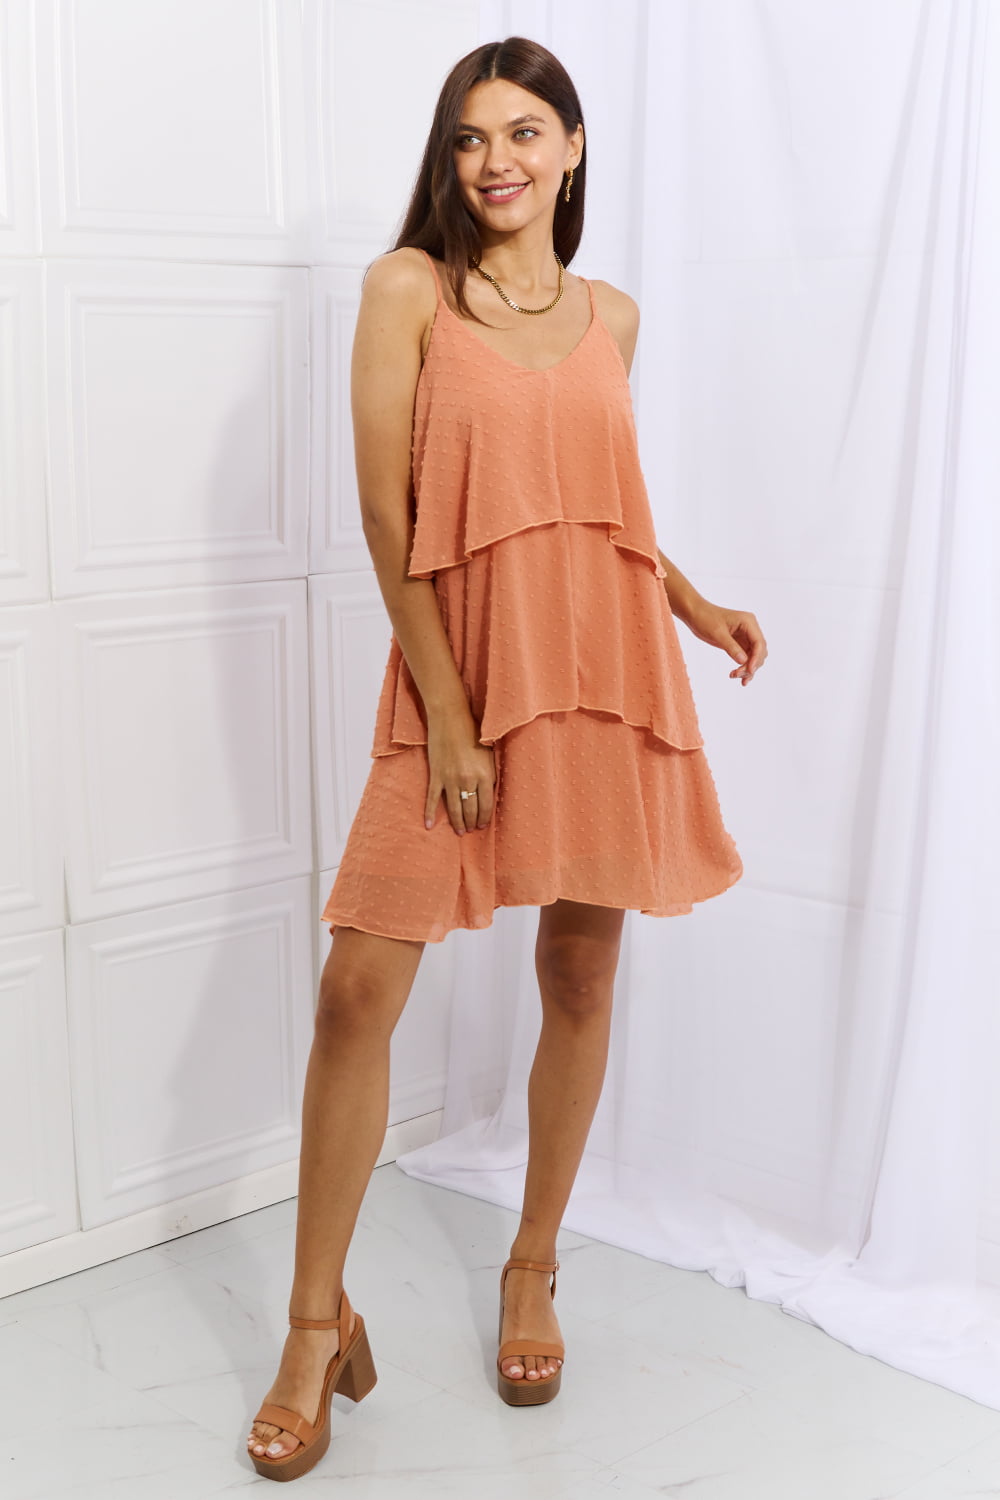 By The River Cami Dress in Sherbet